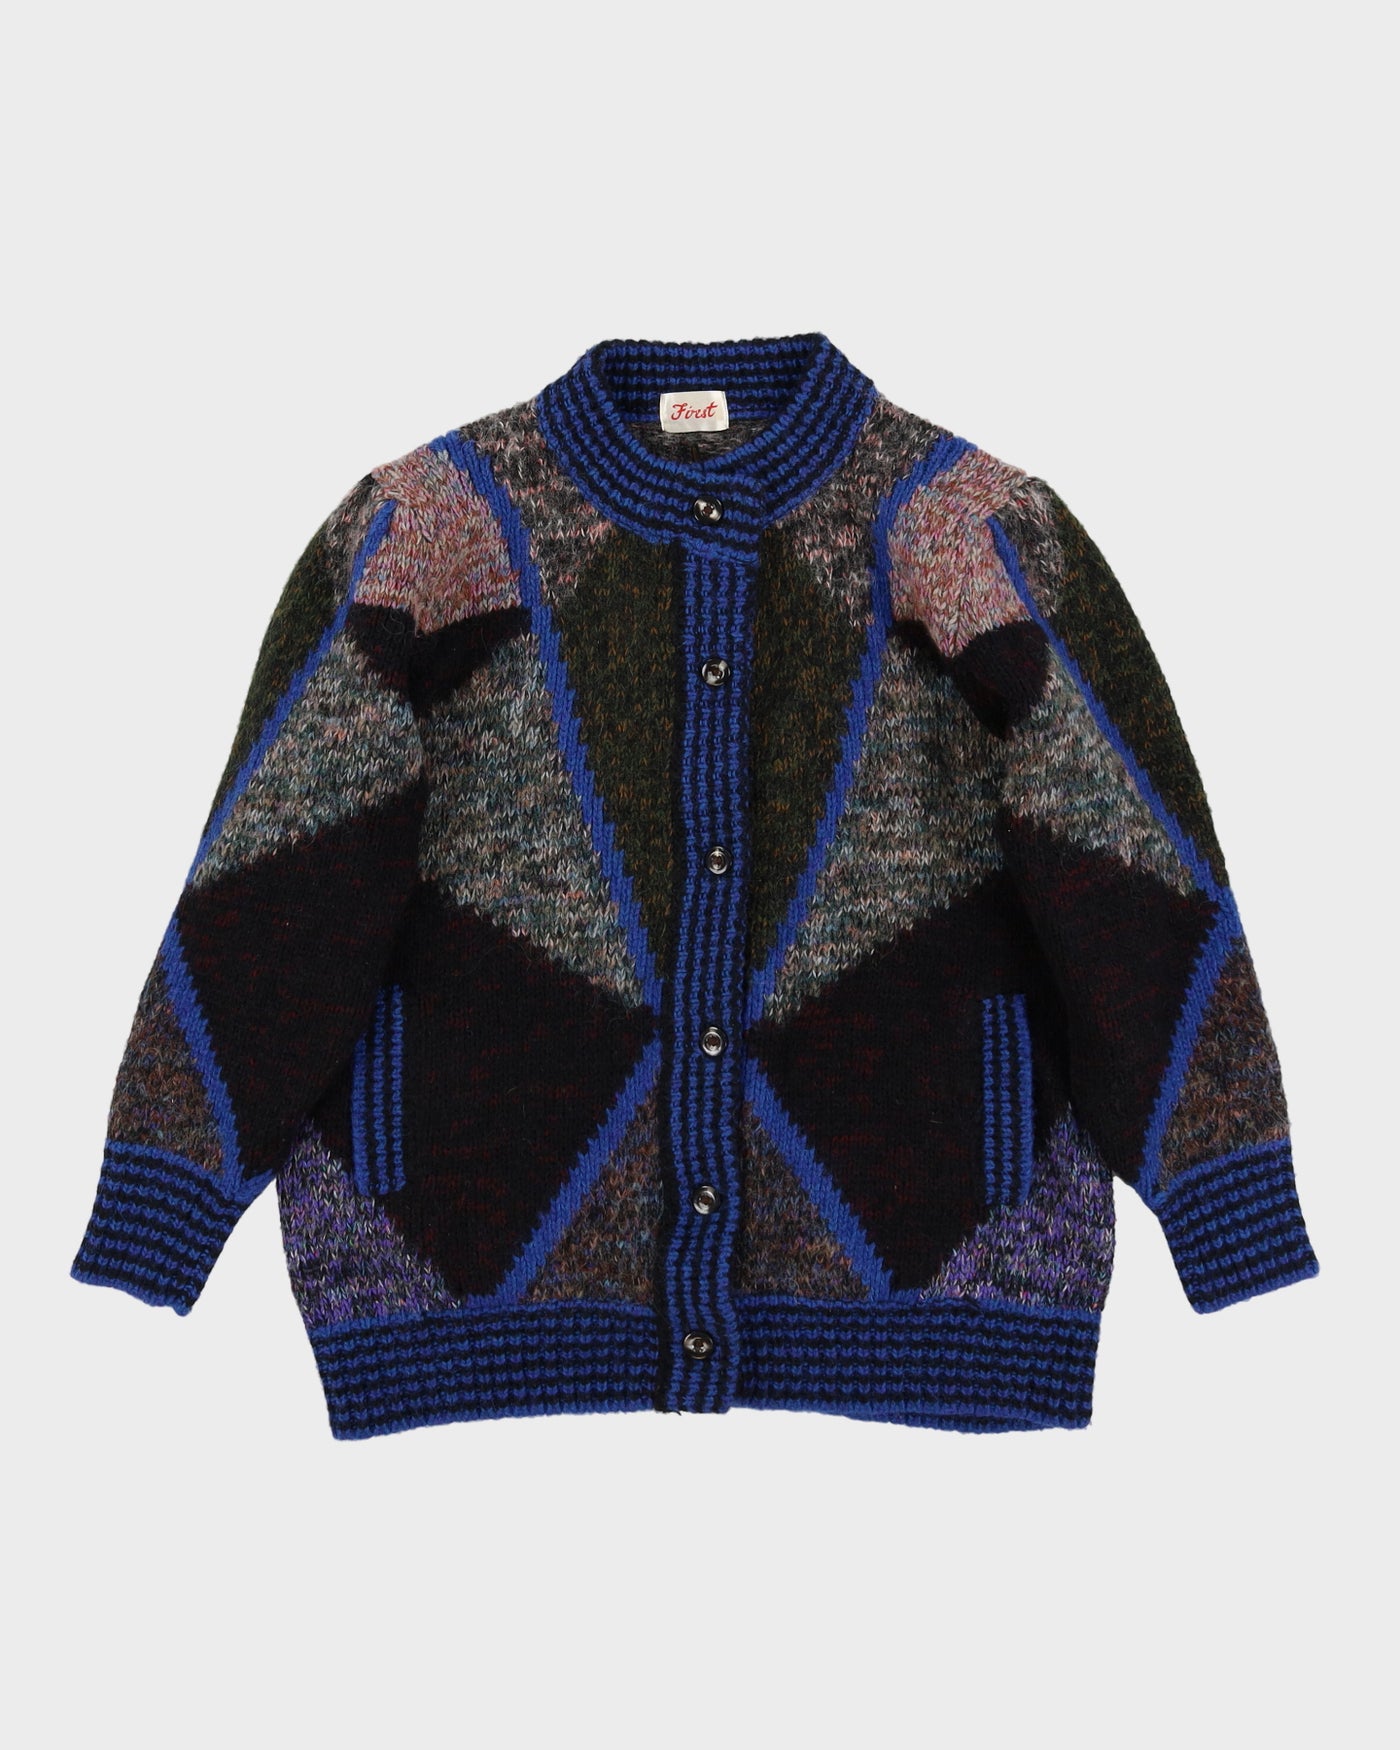 1980s Patterned Chunky Wool Blend Knitted Cardigan - M